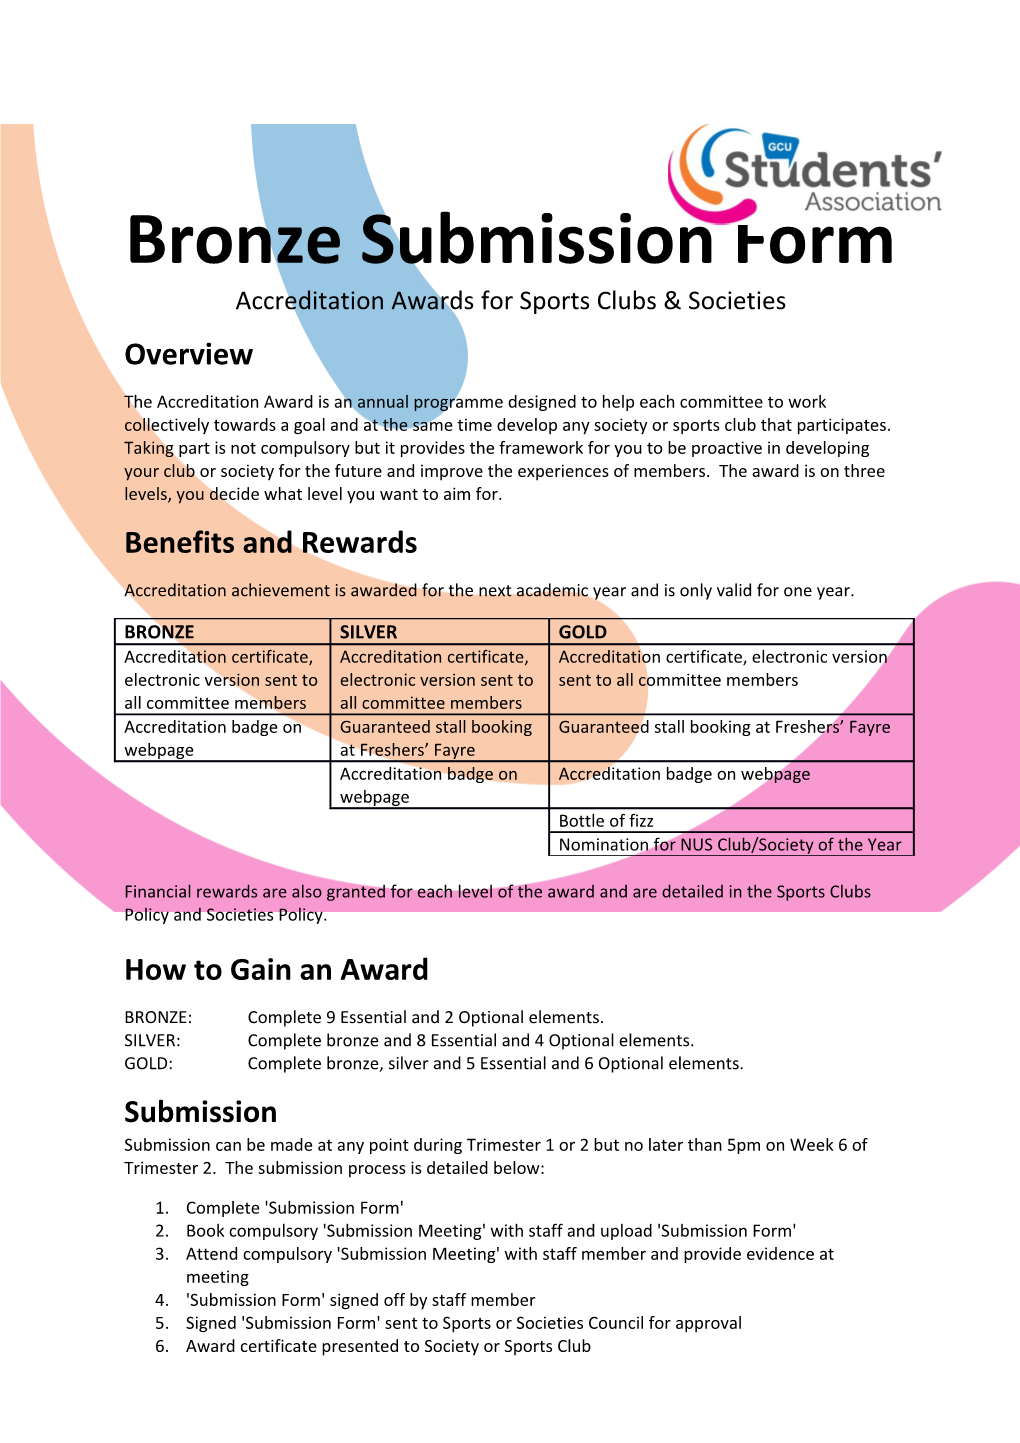 Bronze Submission Form